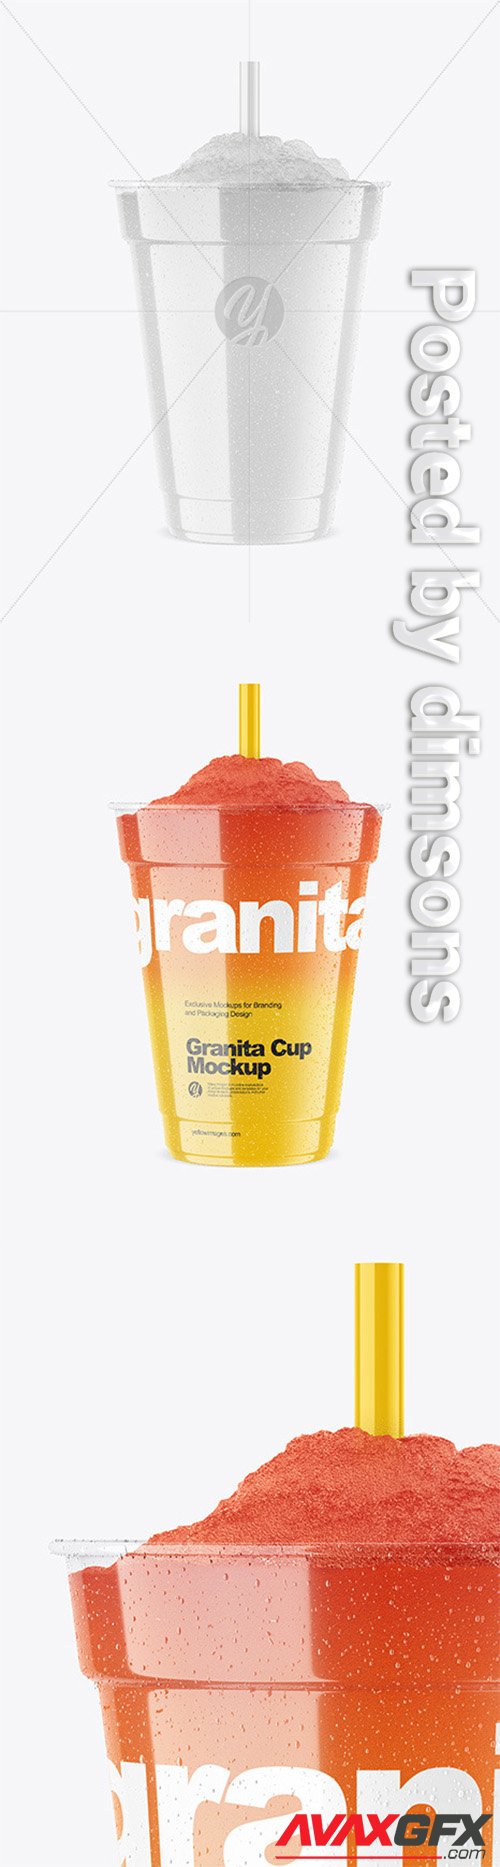 Download Granita Cup Mockup 65050 Avaxgfx All Downloads That You Need In One Place Graphic From Nitroflare Rapidgator